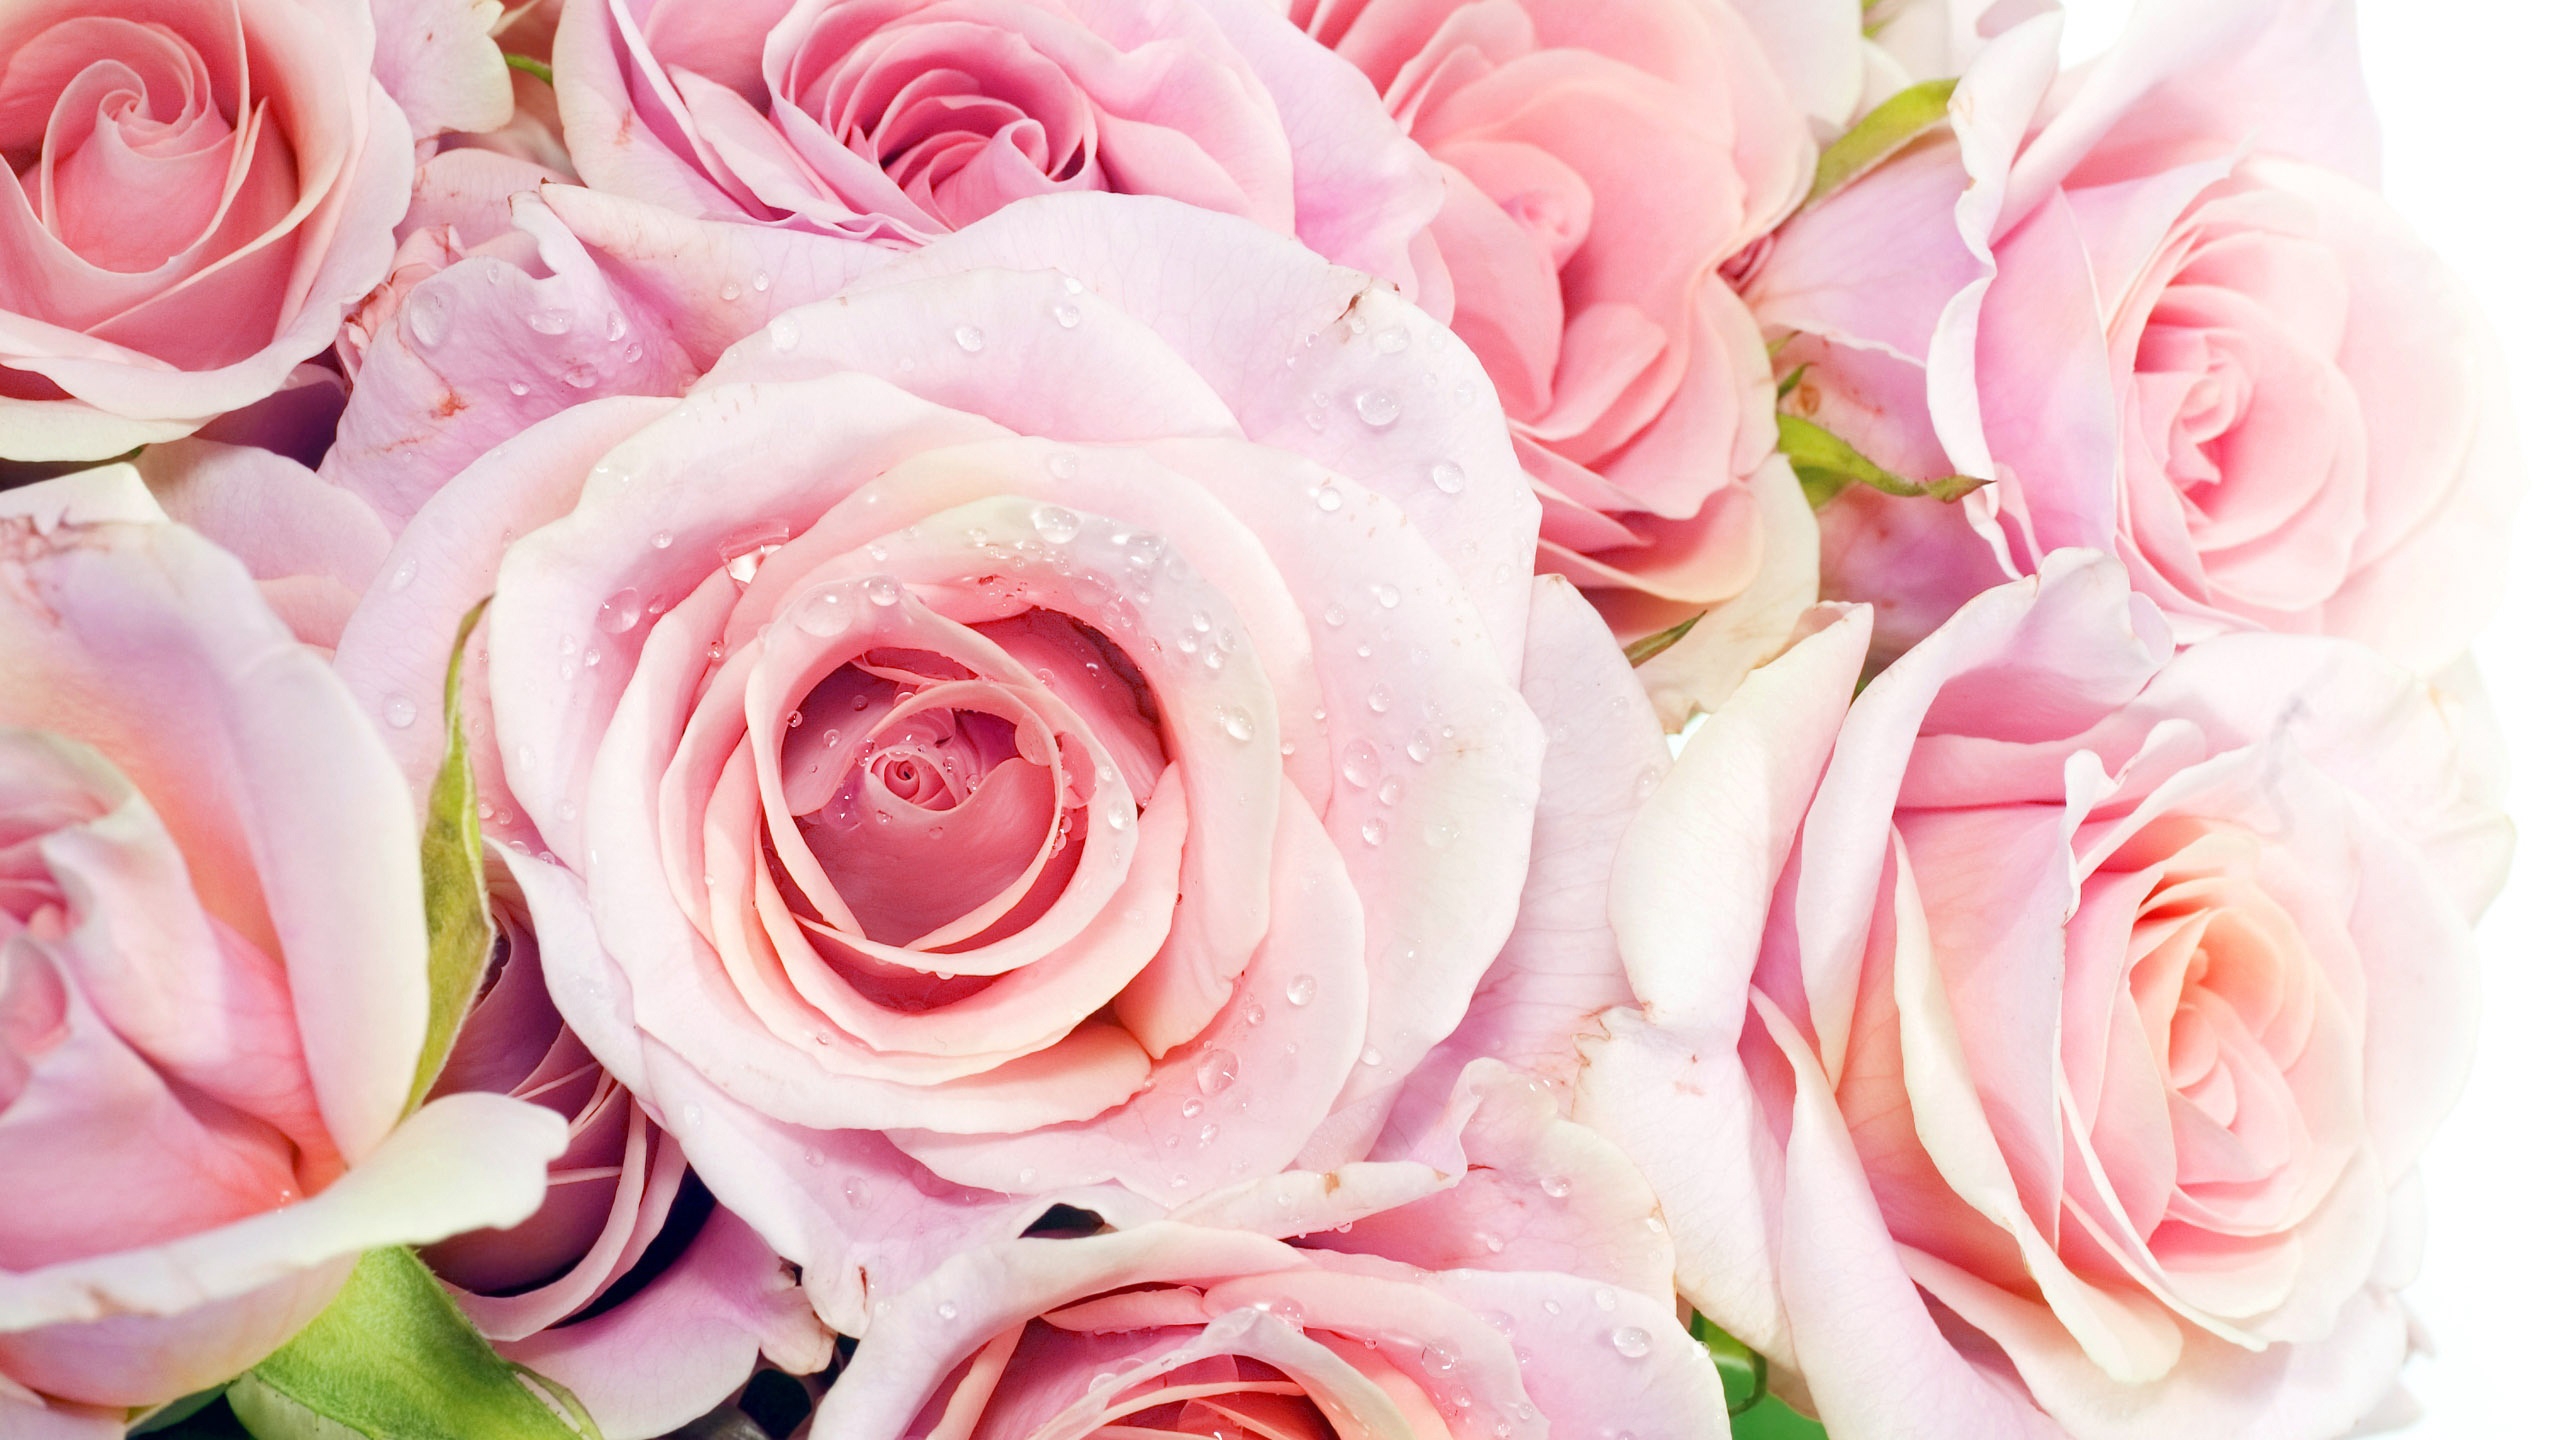 Pink Roses for 2560x1440 HDTV resolution